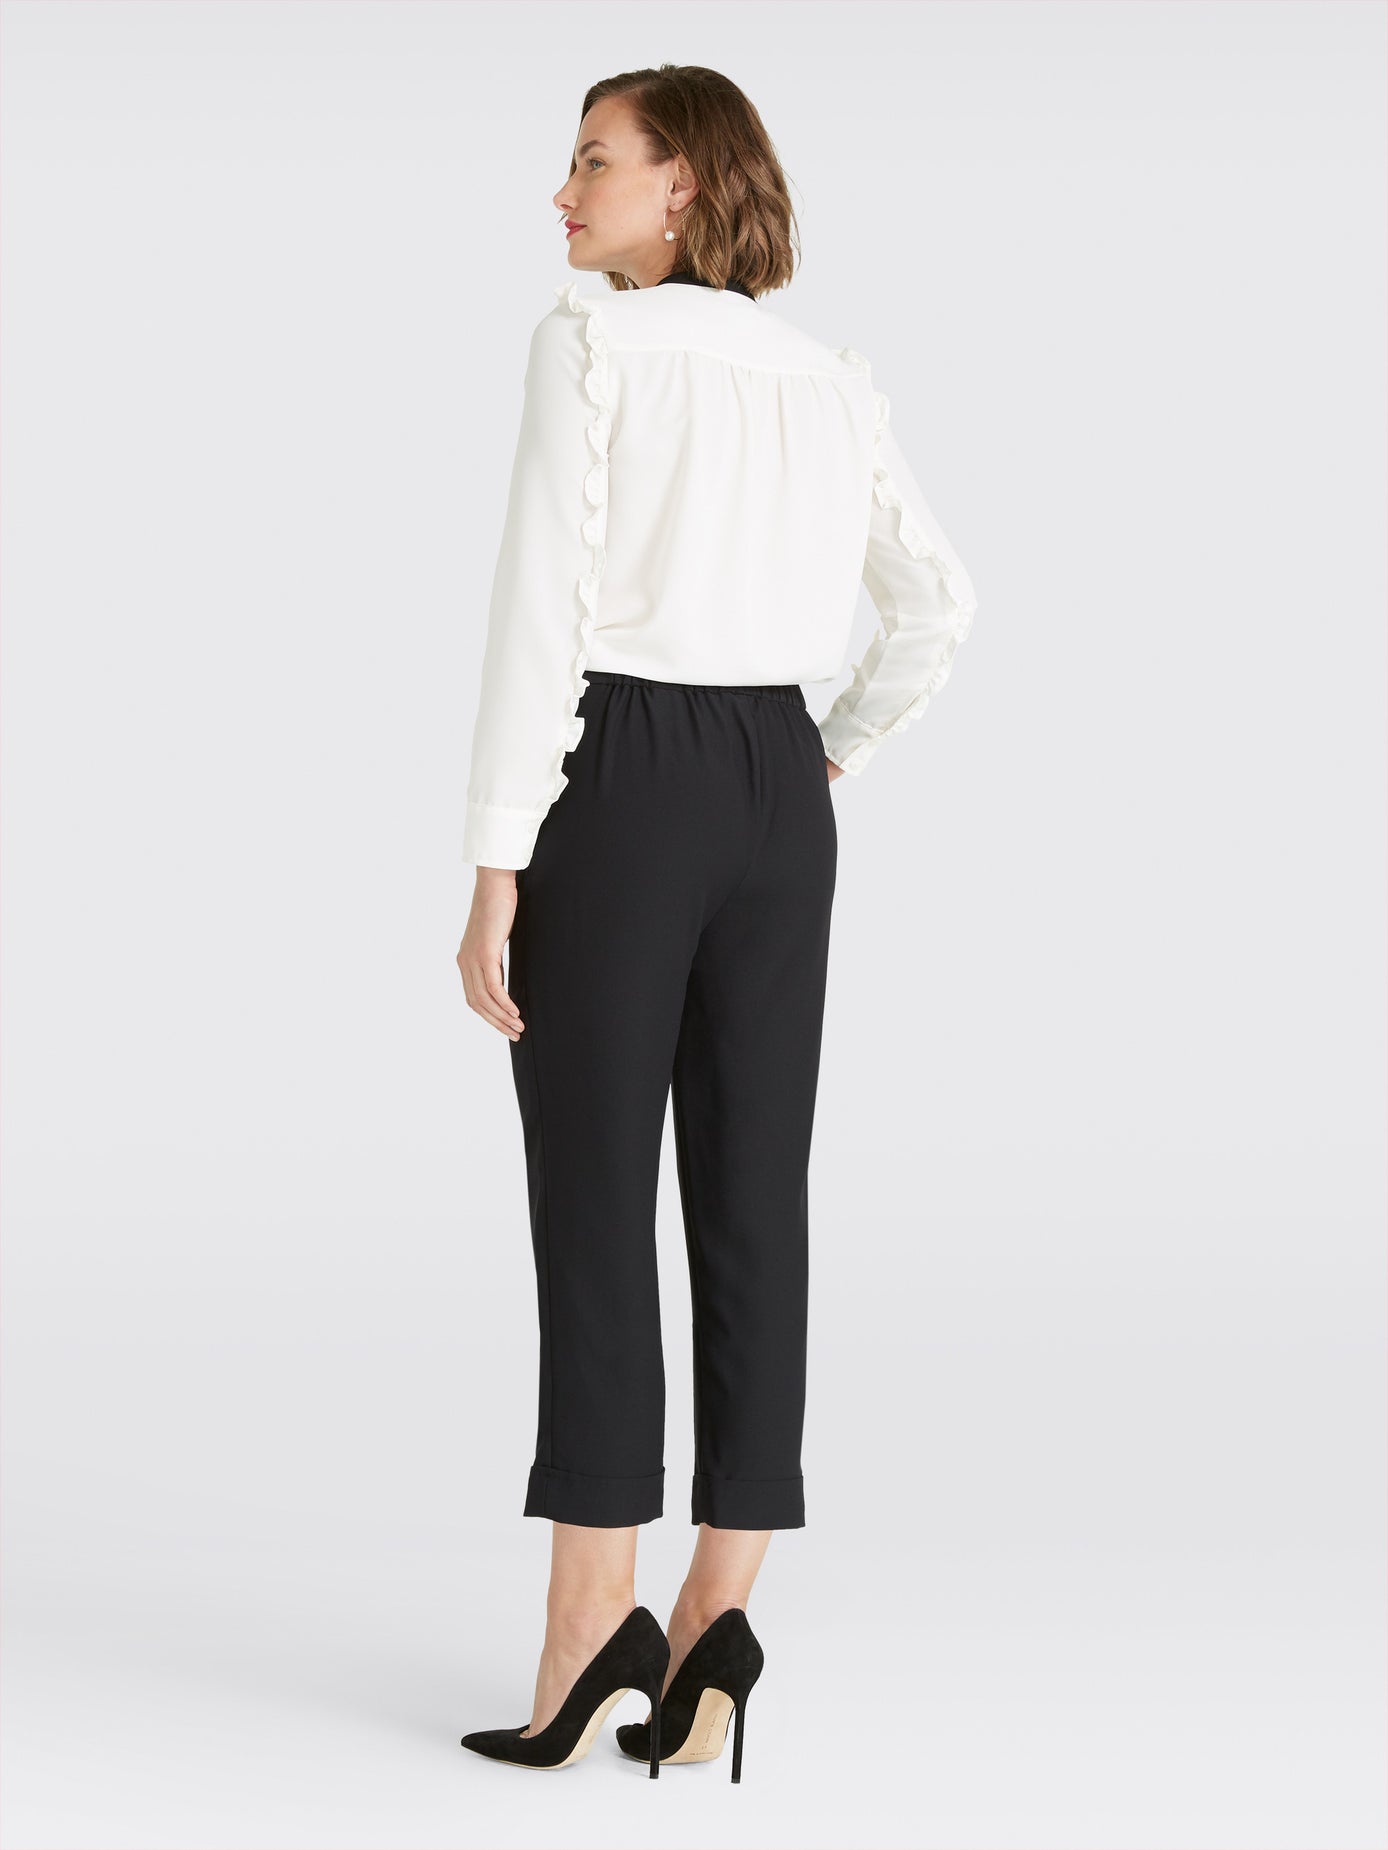 Ankle Cuff Pant